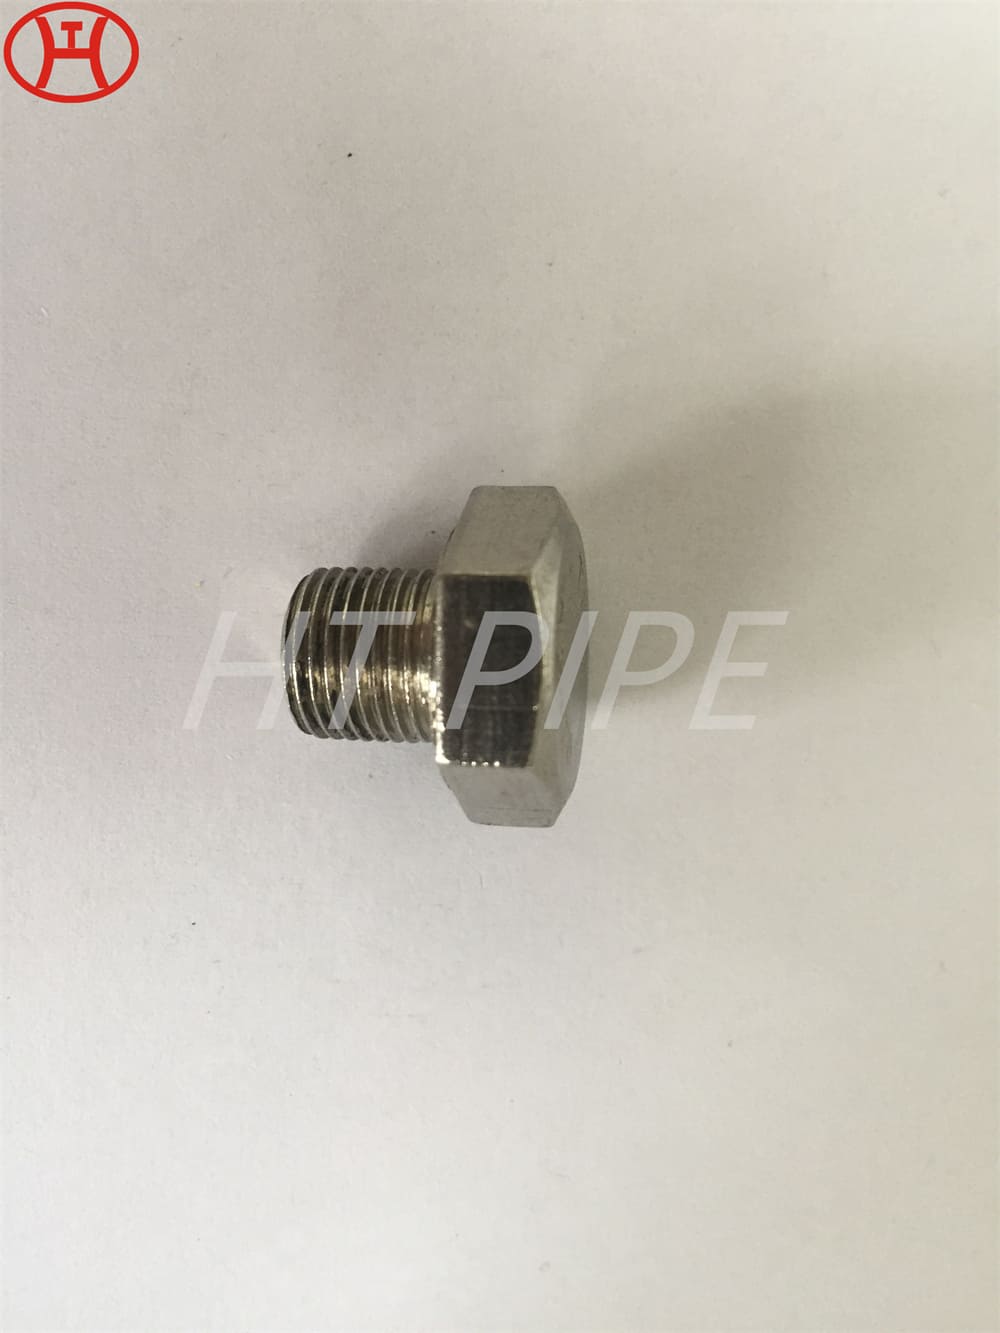 Alloy 725 UNS N07725 Inconel 725 full thread hex bolt DIN933